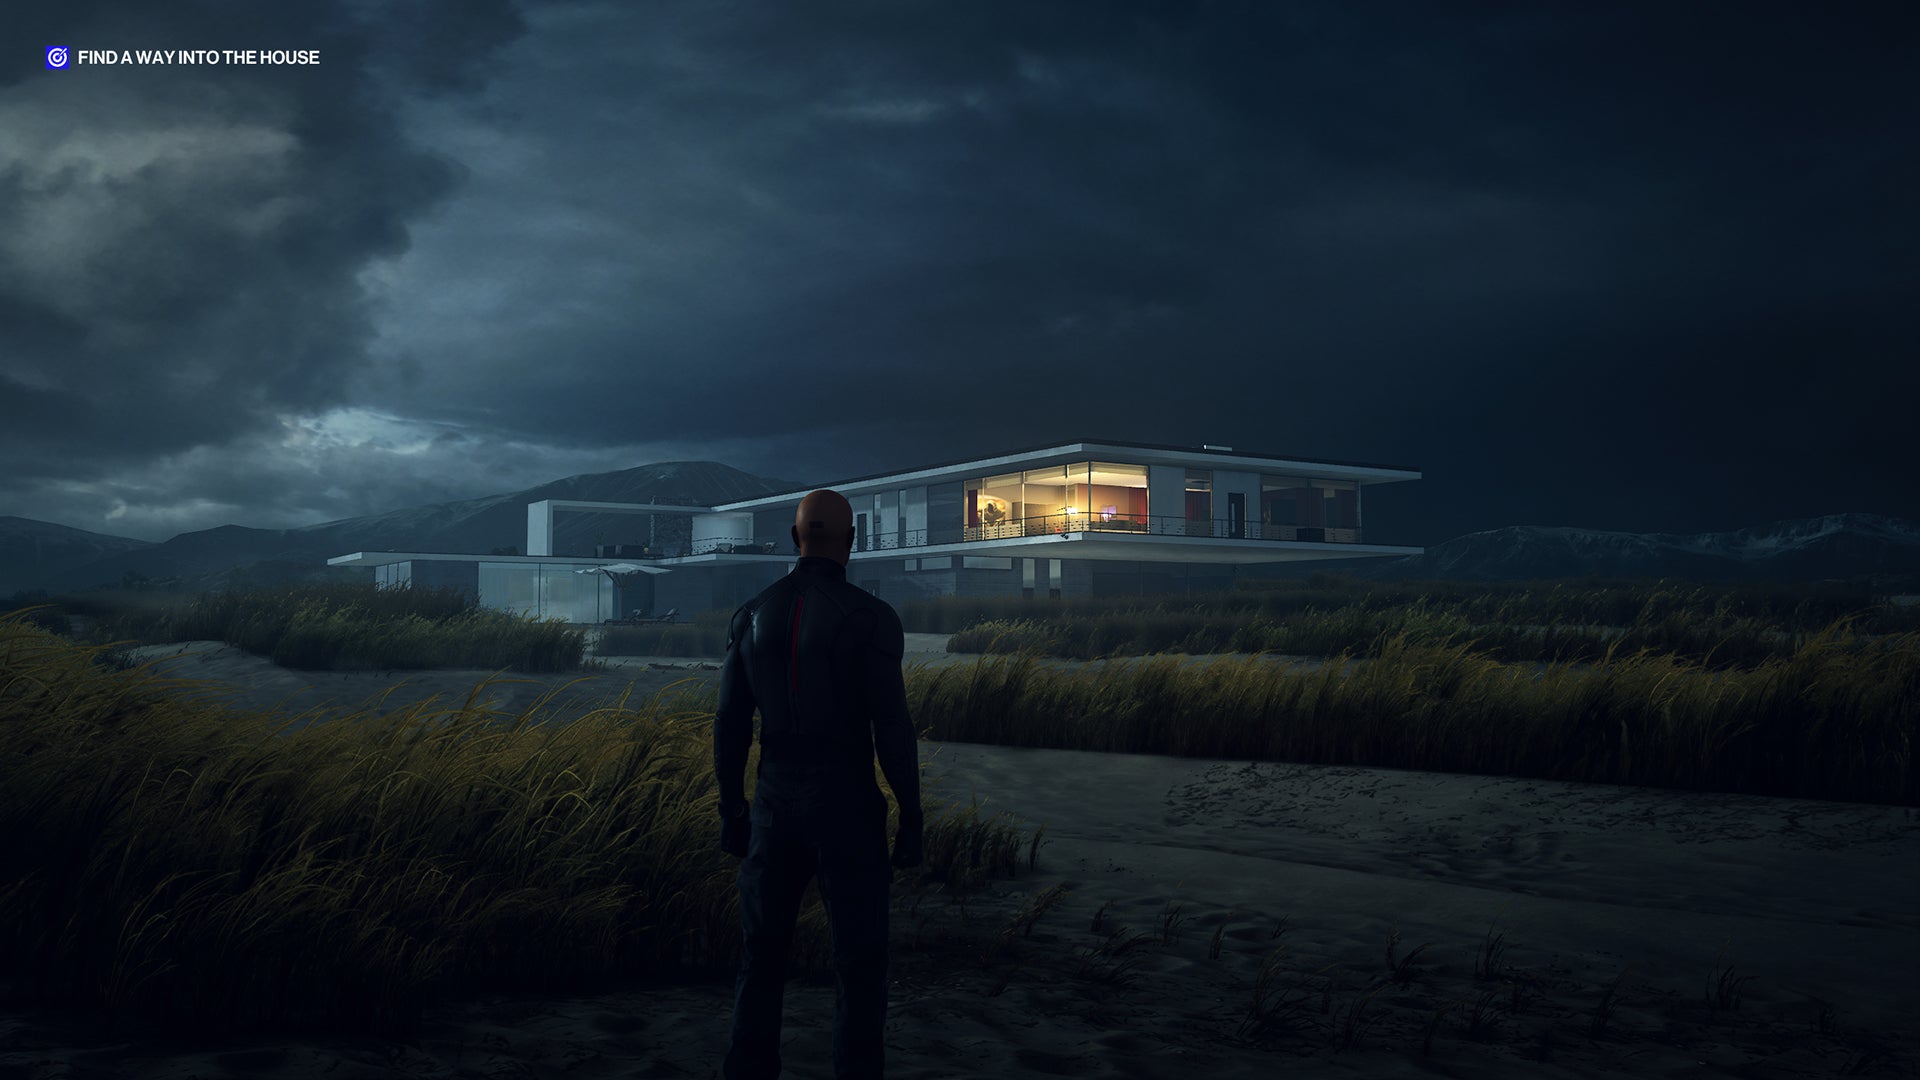 A screenshot of Ian Hitman standing on the beach at Hawke's Beach, looking towards the modern seaside home, at night.